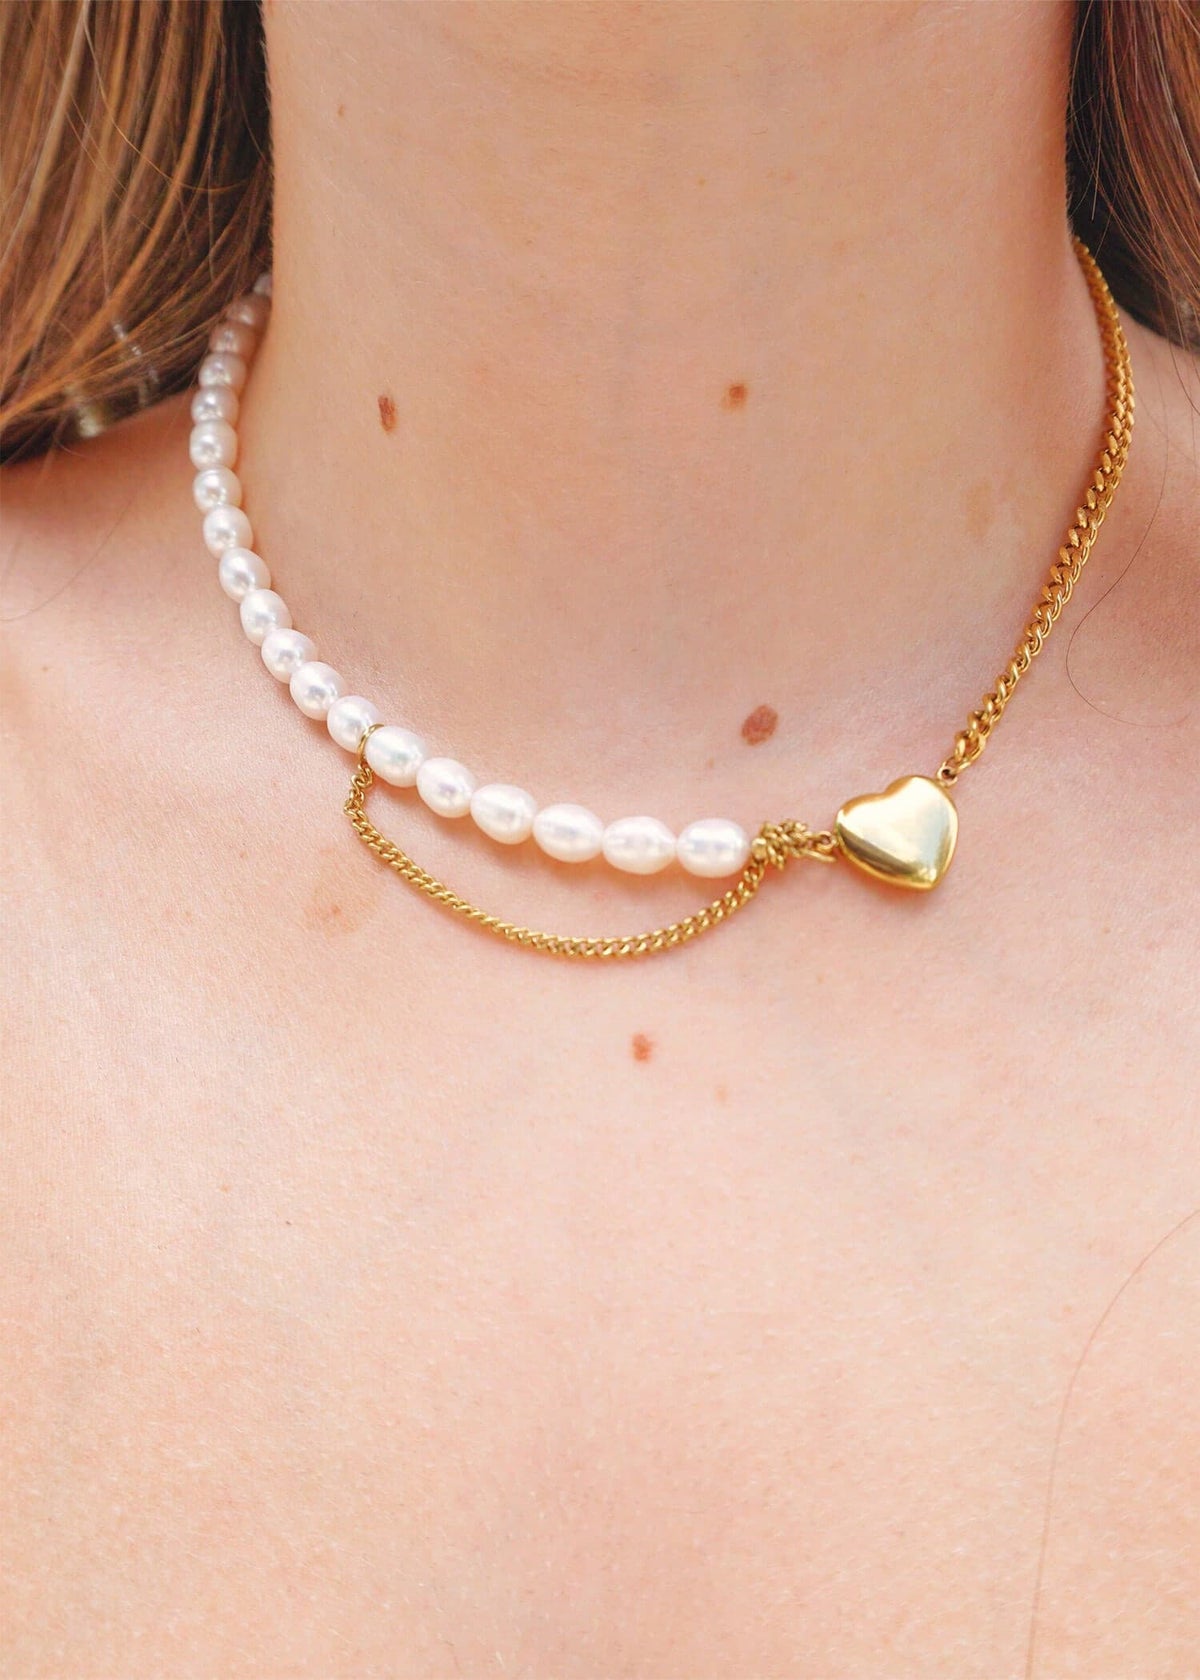 Meet Me In The Middle Necklace - Gold Necklace MerciGrace Boutique.